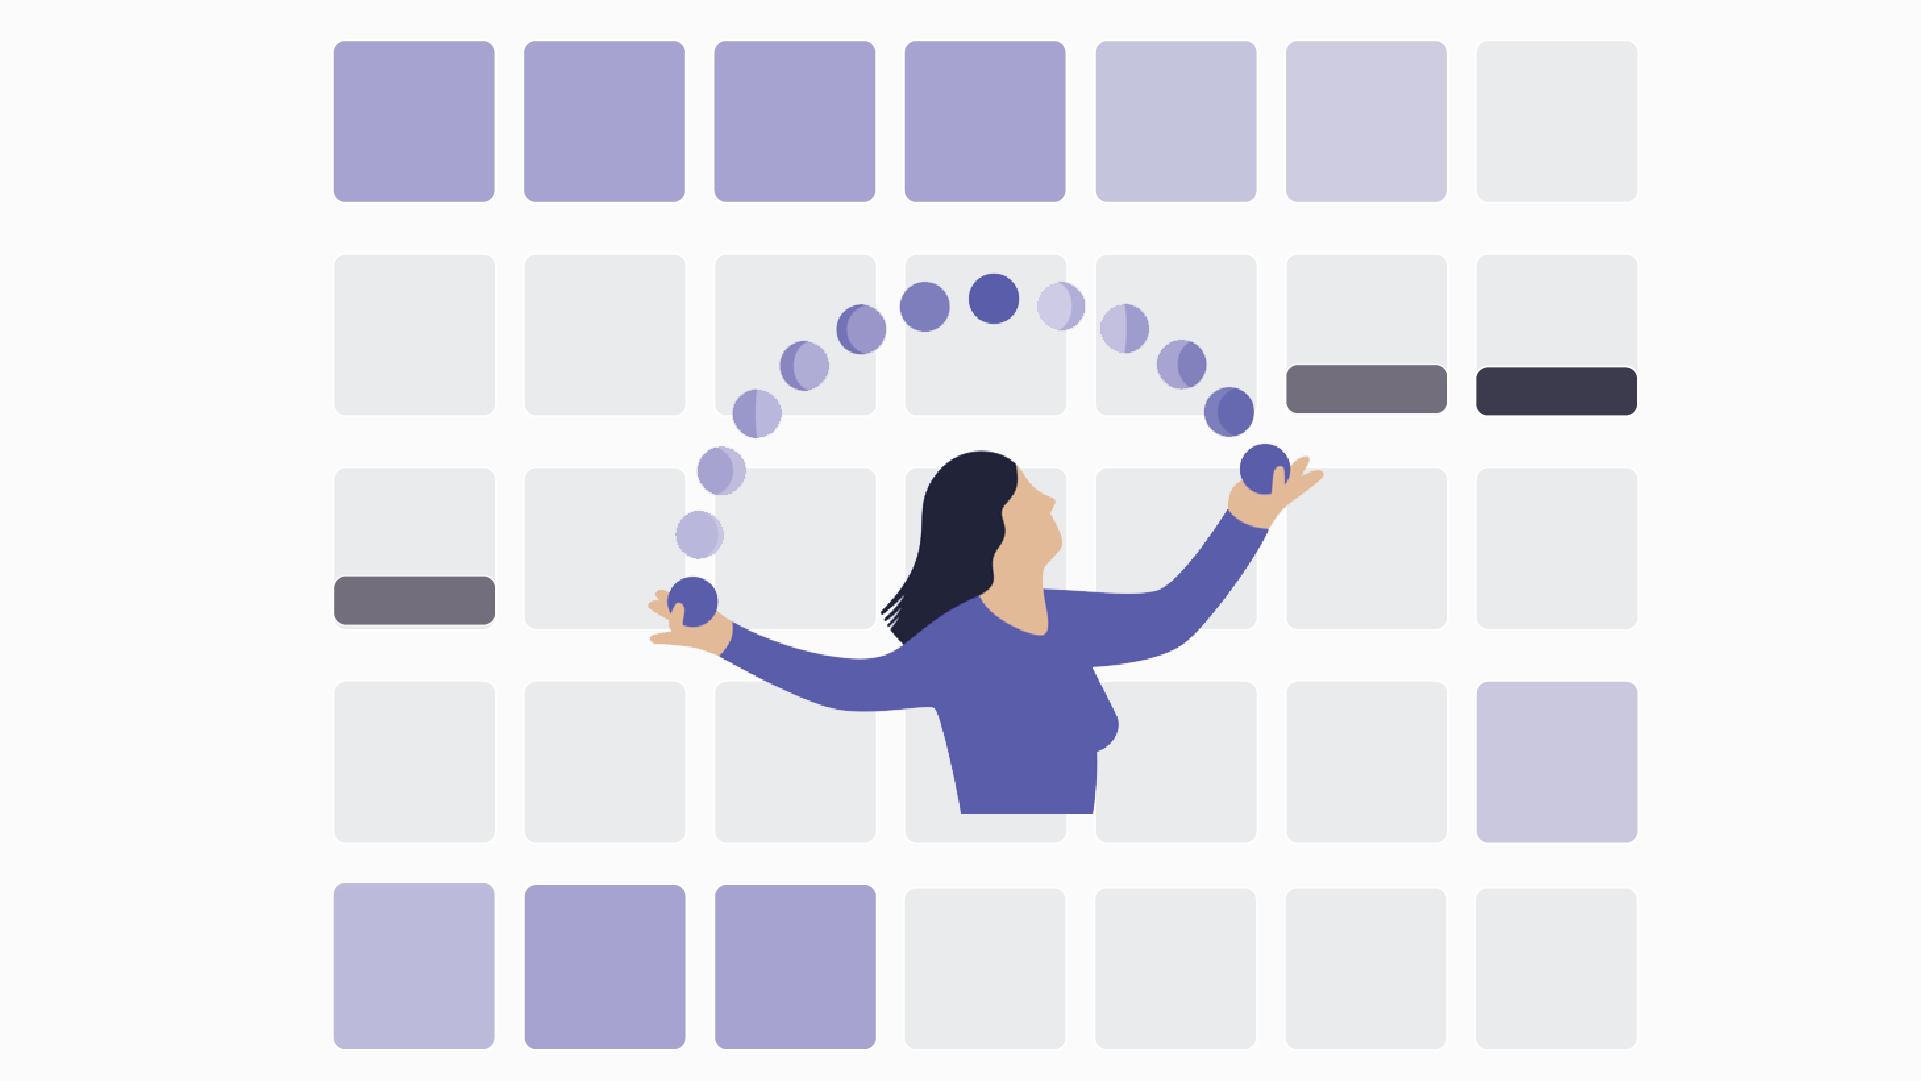 The luna icon over a five-week menstrual cycle calendar represented by grey boxes. The boxes that are purple represent the possible bleeding days, the dark blue lines on the boxes represent possible ovulation days.